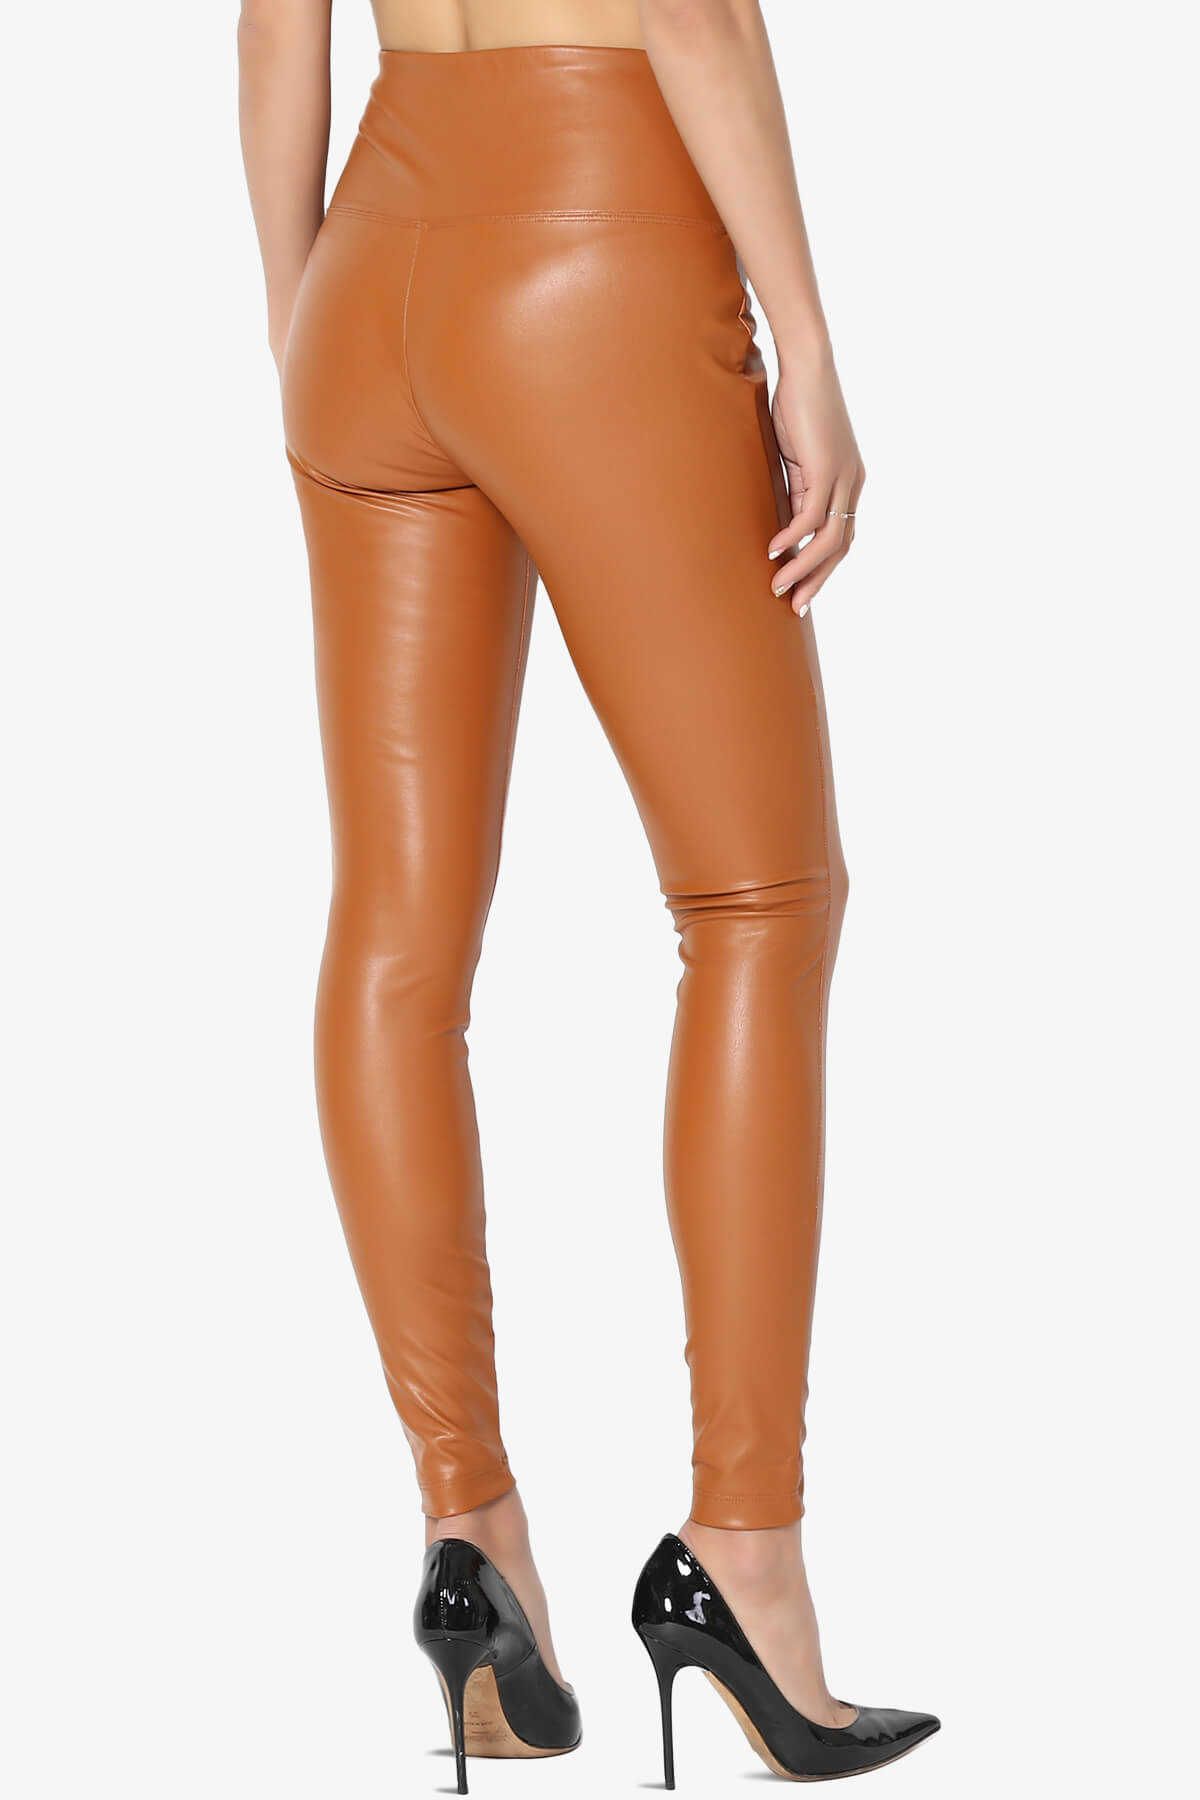 TheMogan Women's Sexy Stretchy Faux Leather Leggings Wide Band High Waist Tights Pants